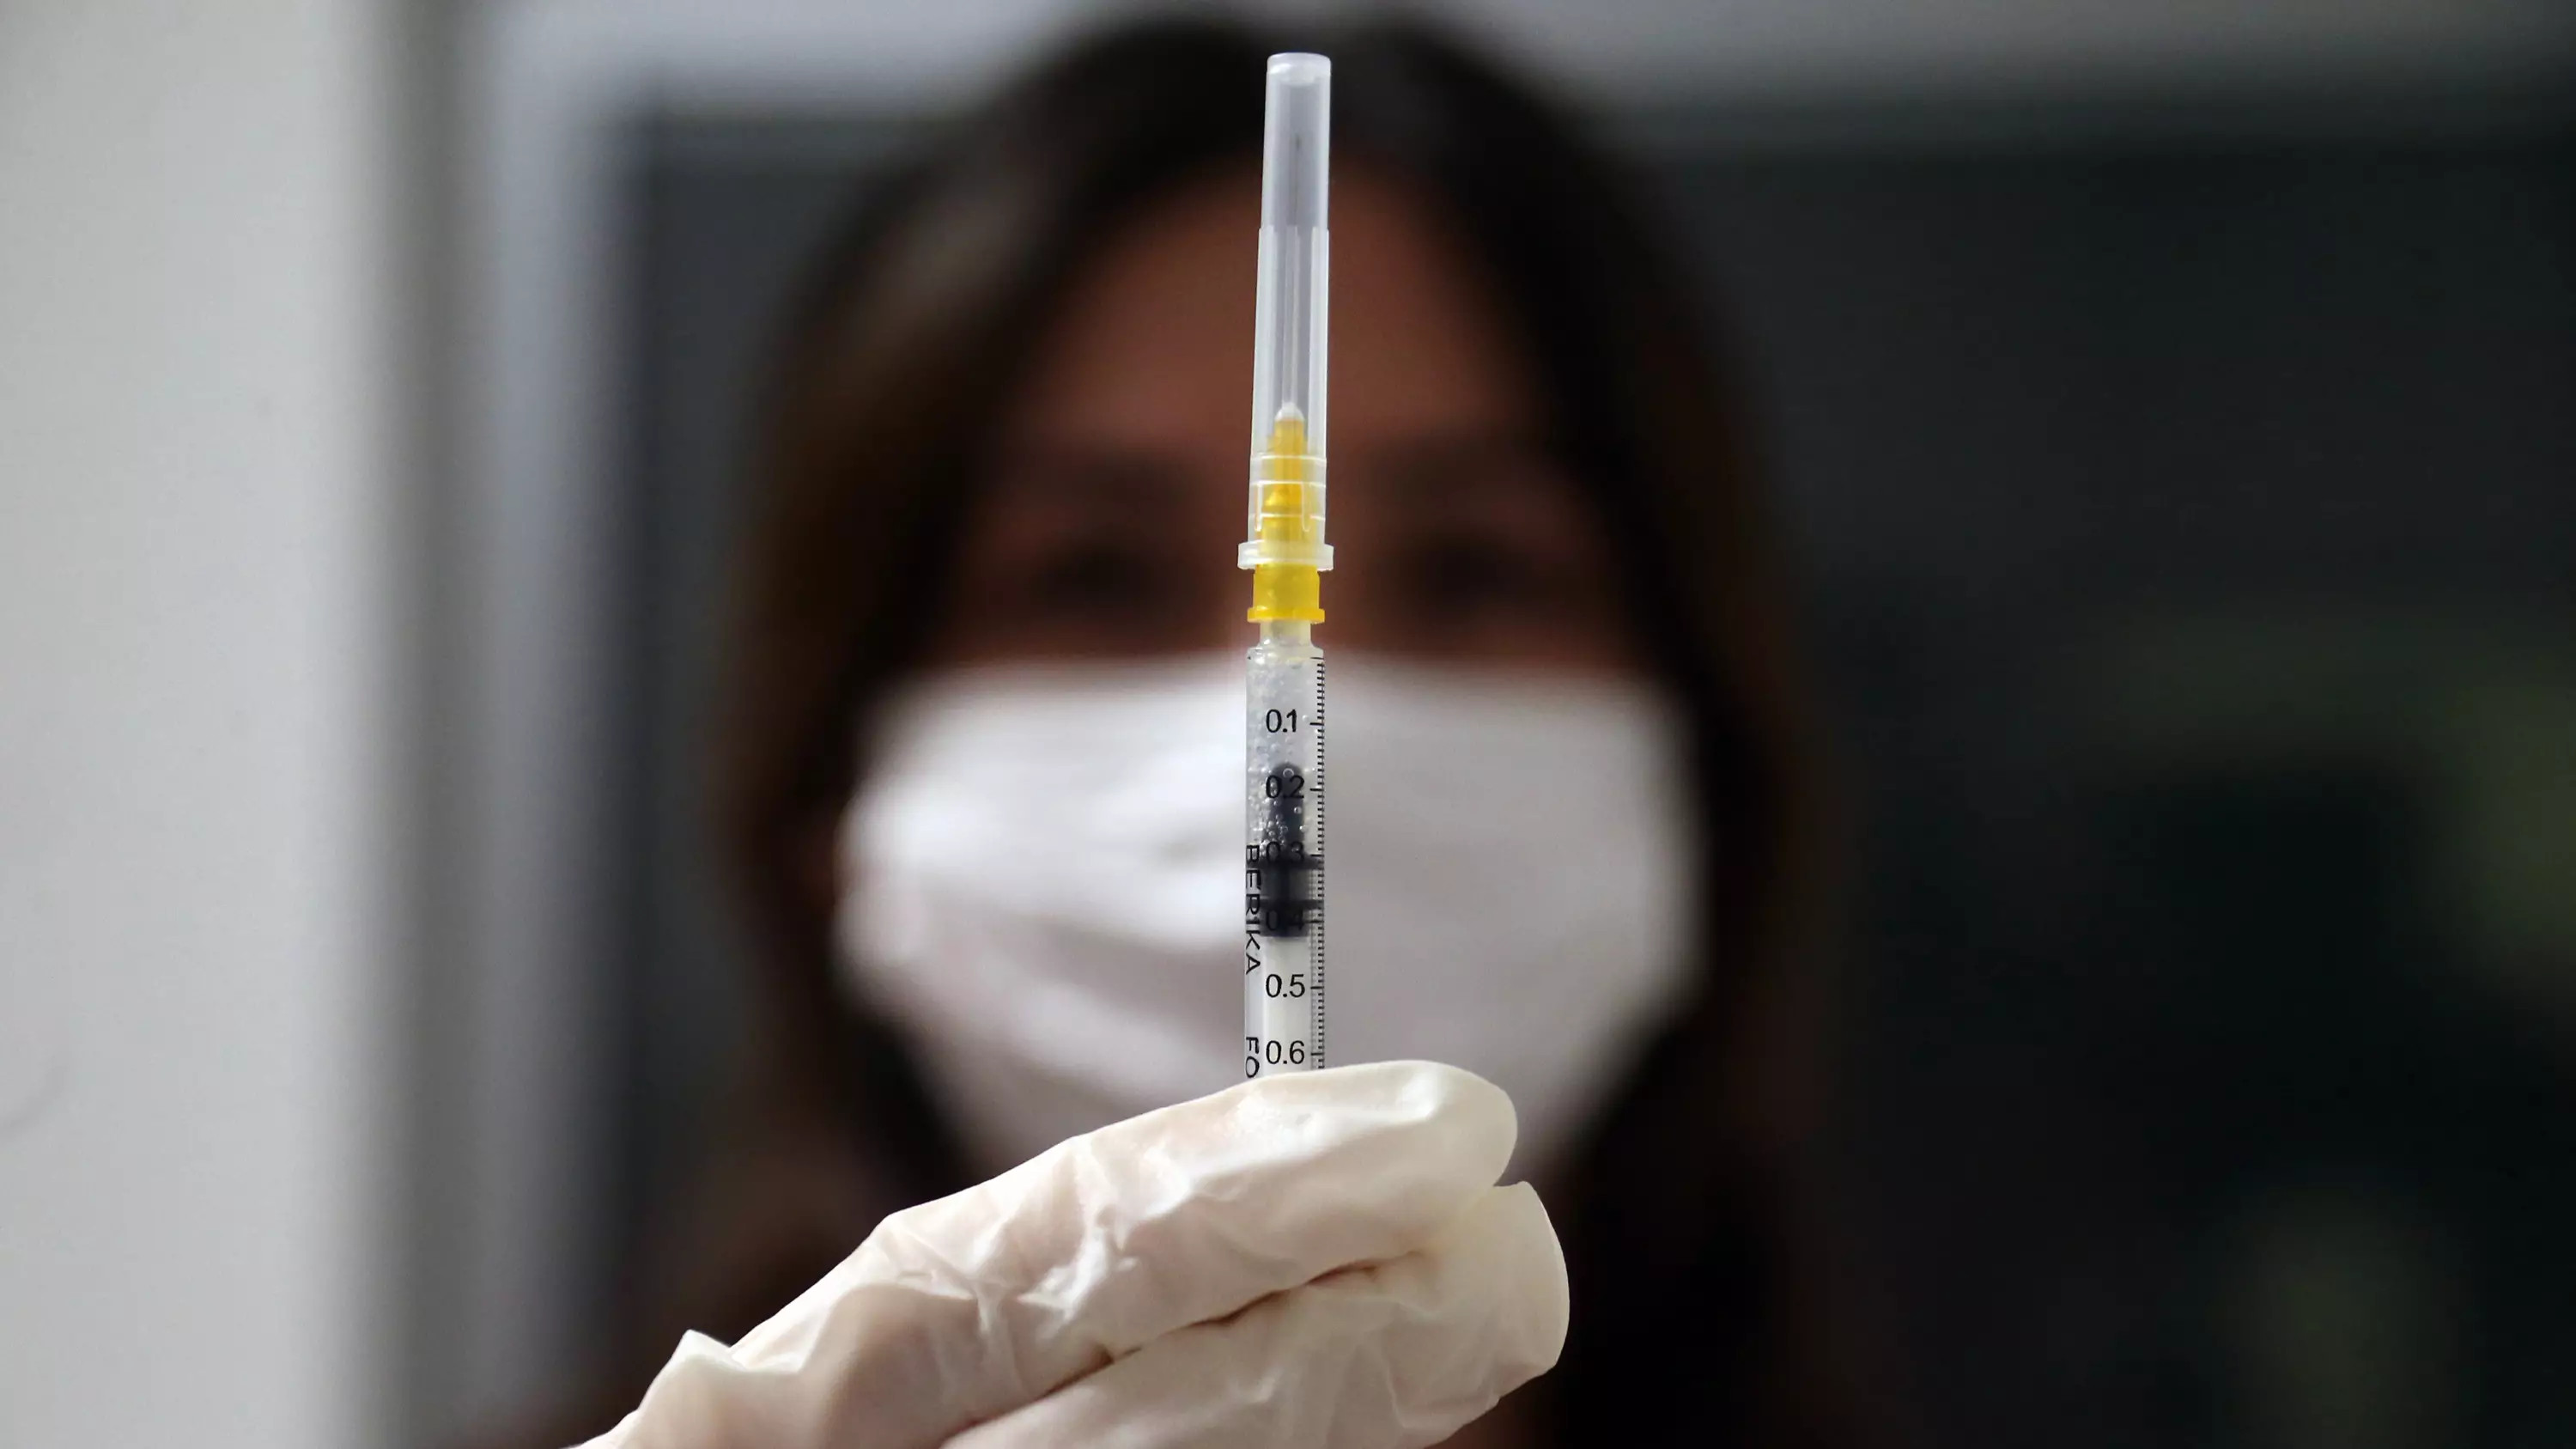 Australian Population Not Expected To Be Fully Vaccinated Until End Of Next Year, Says Expert